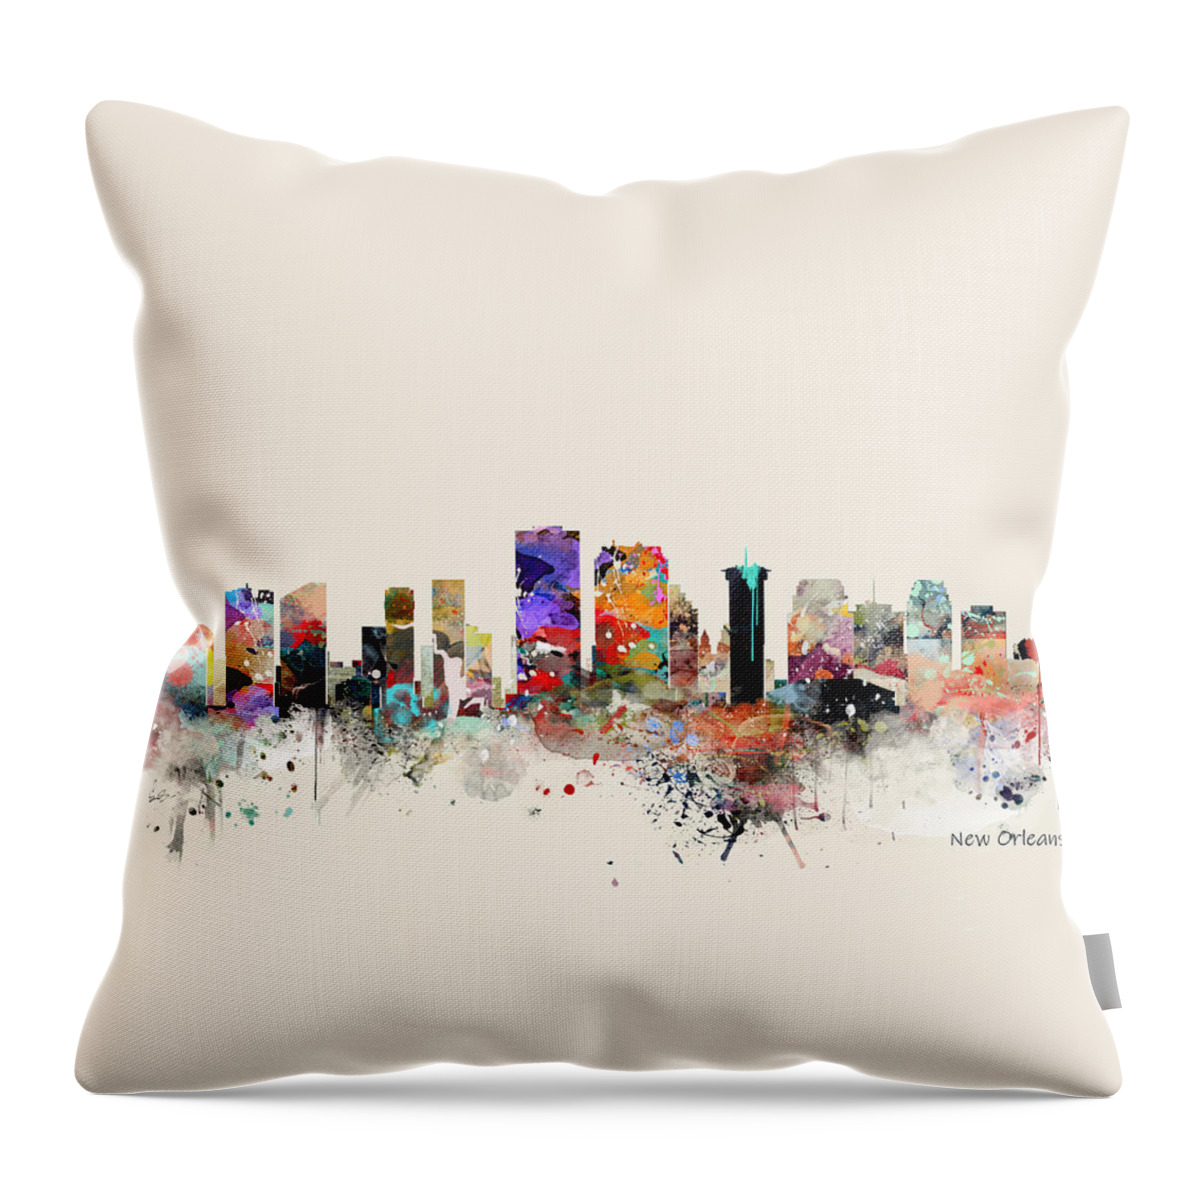 New Orleans Throw Pillow featuring the painting New Orleans Skyline #1 by Bri Buckley